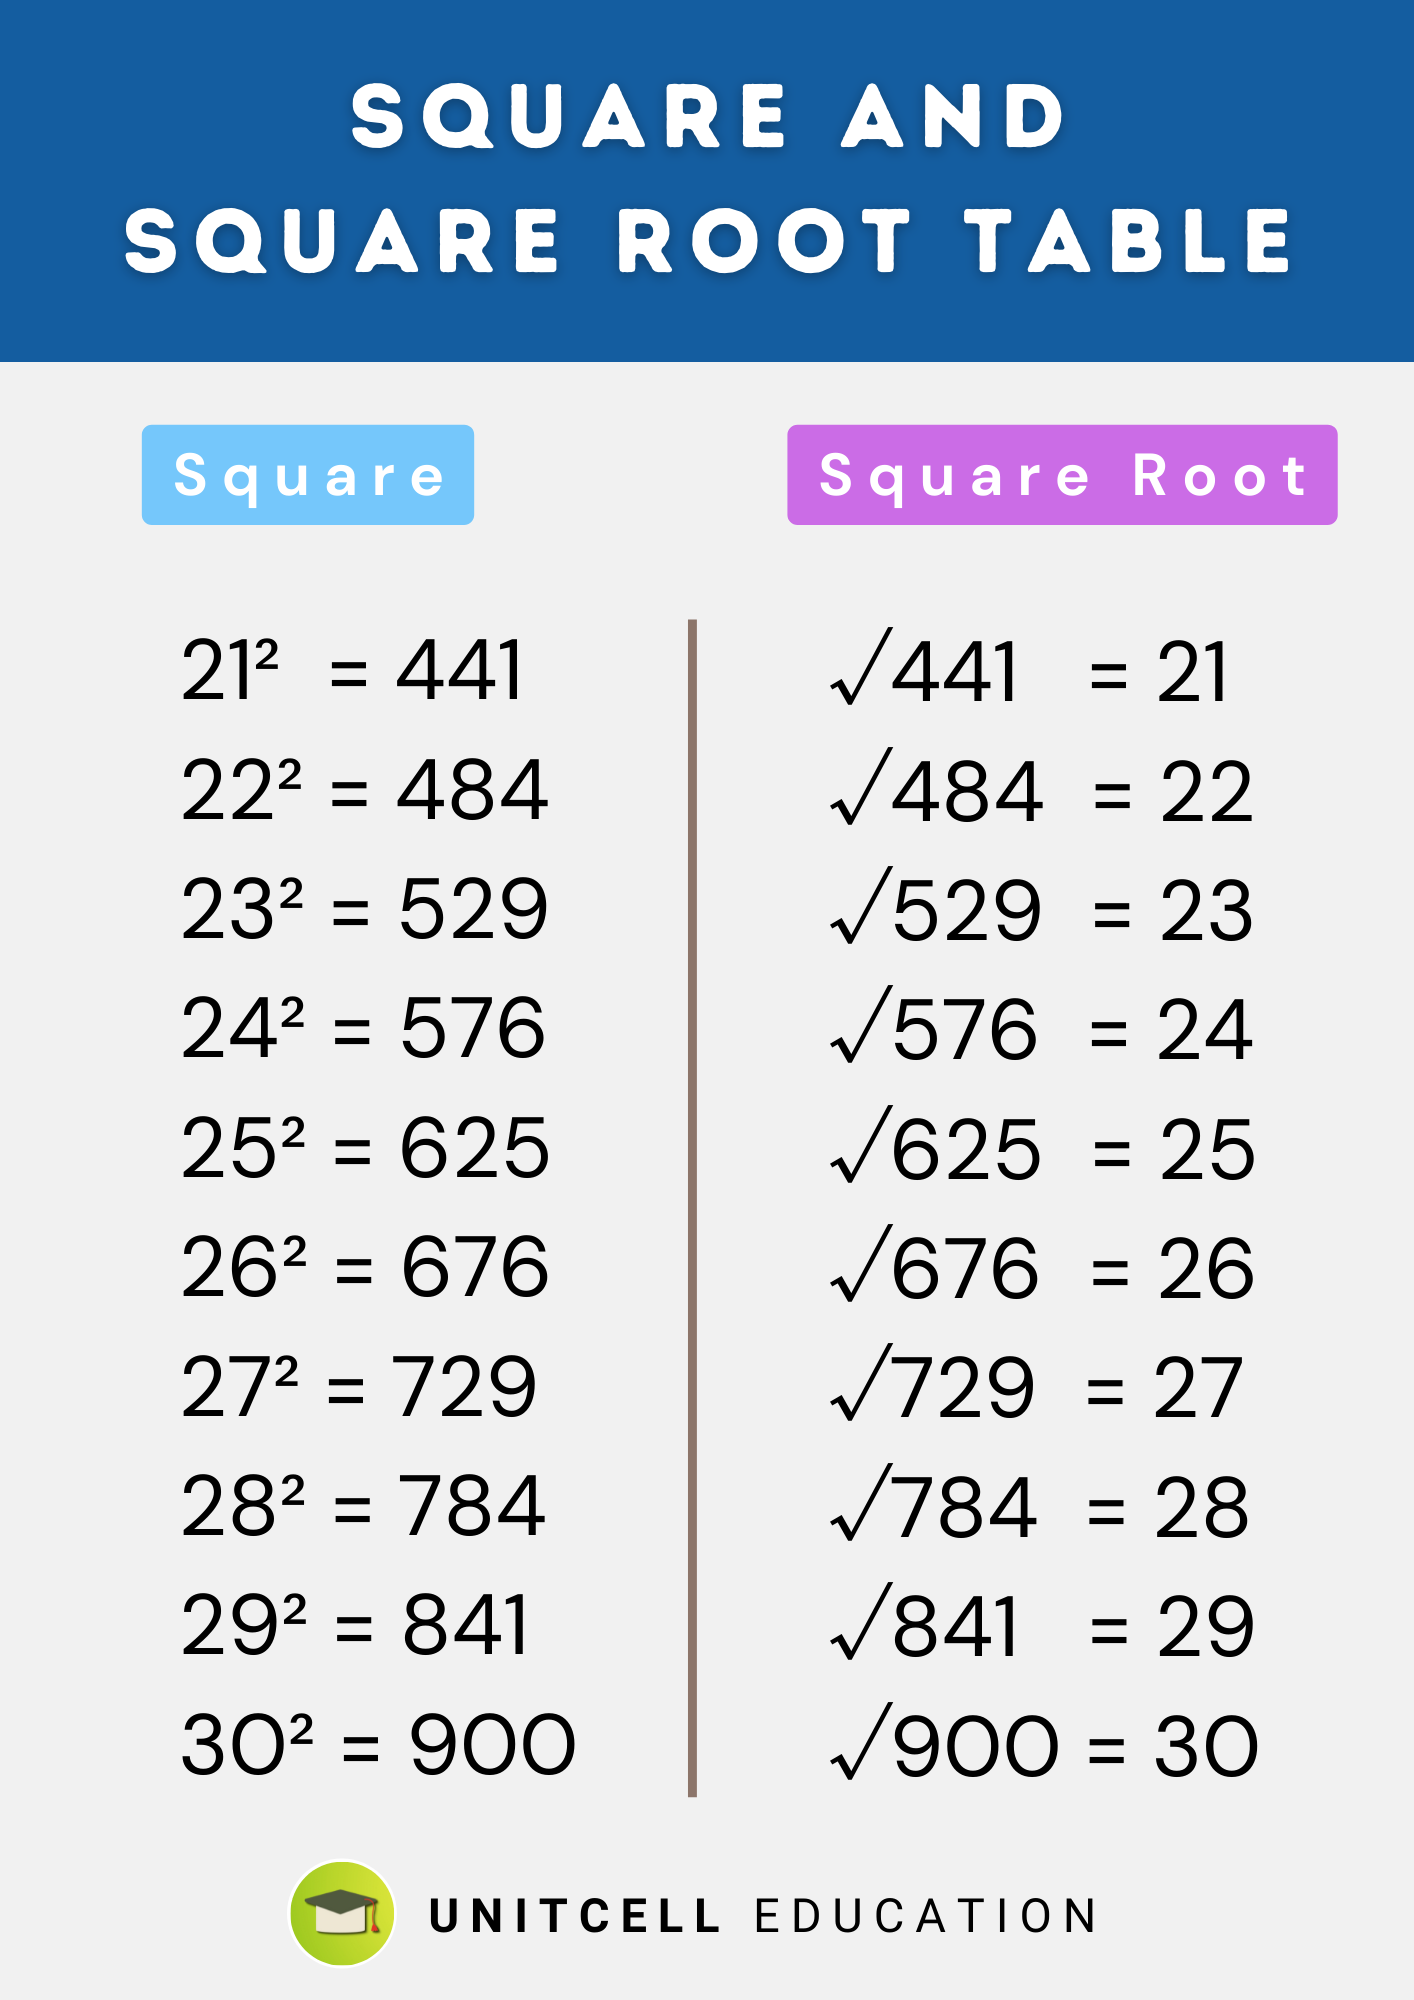 Square and square root table from 21 to 30. printable sheets for students.